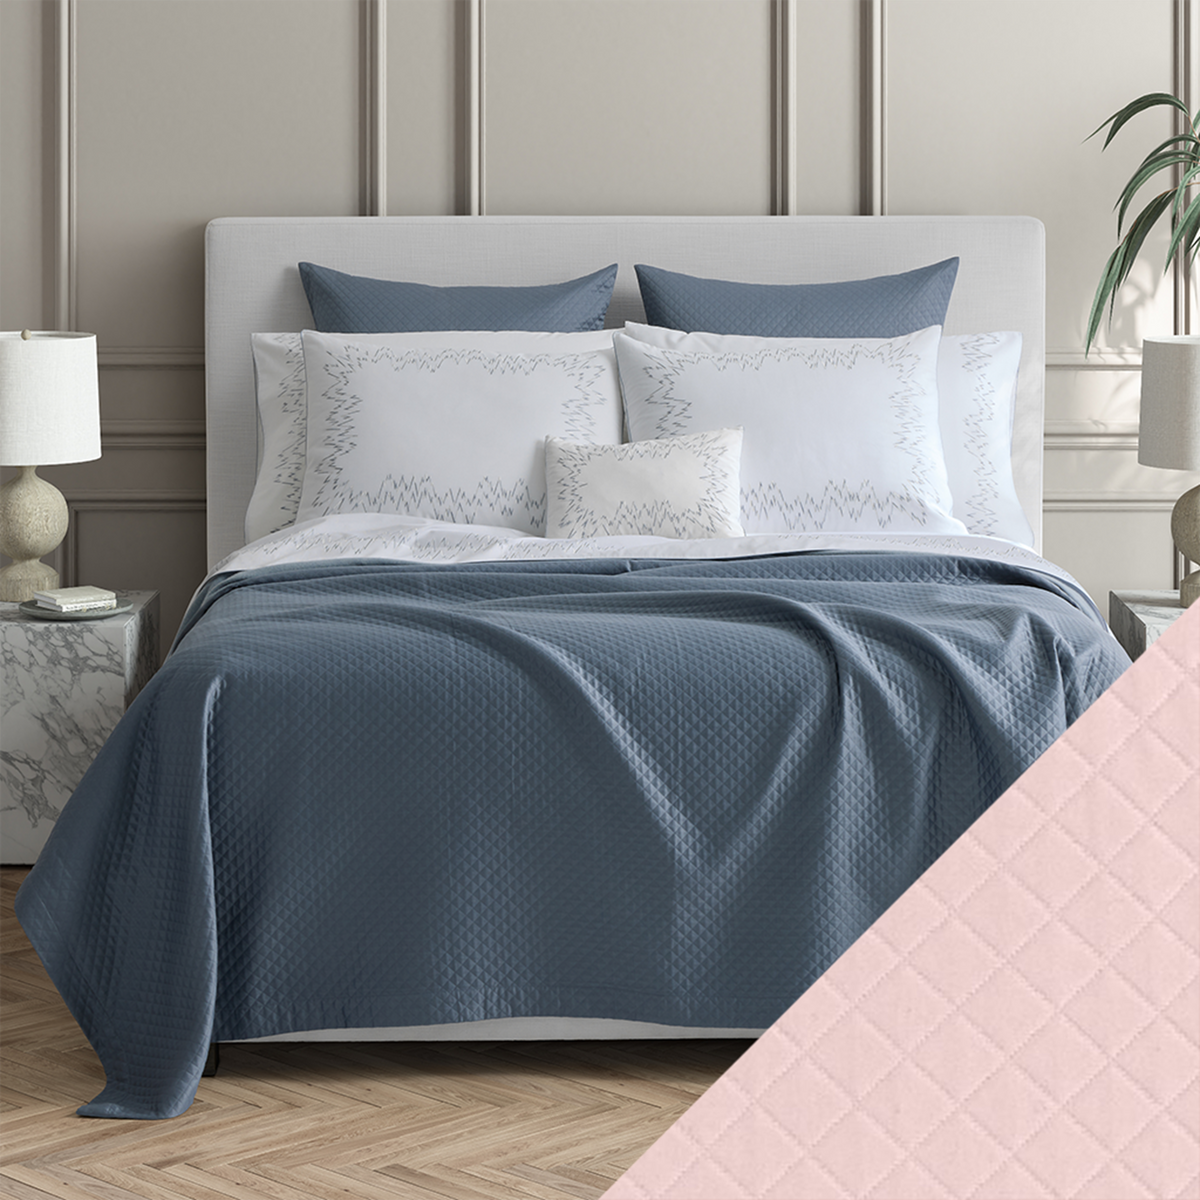 Bed Dressed in Matouk Petra Bedding with Swatch in Color Pink